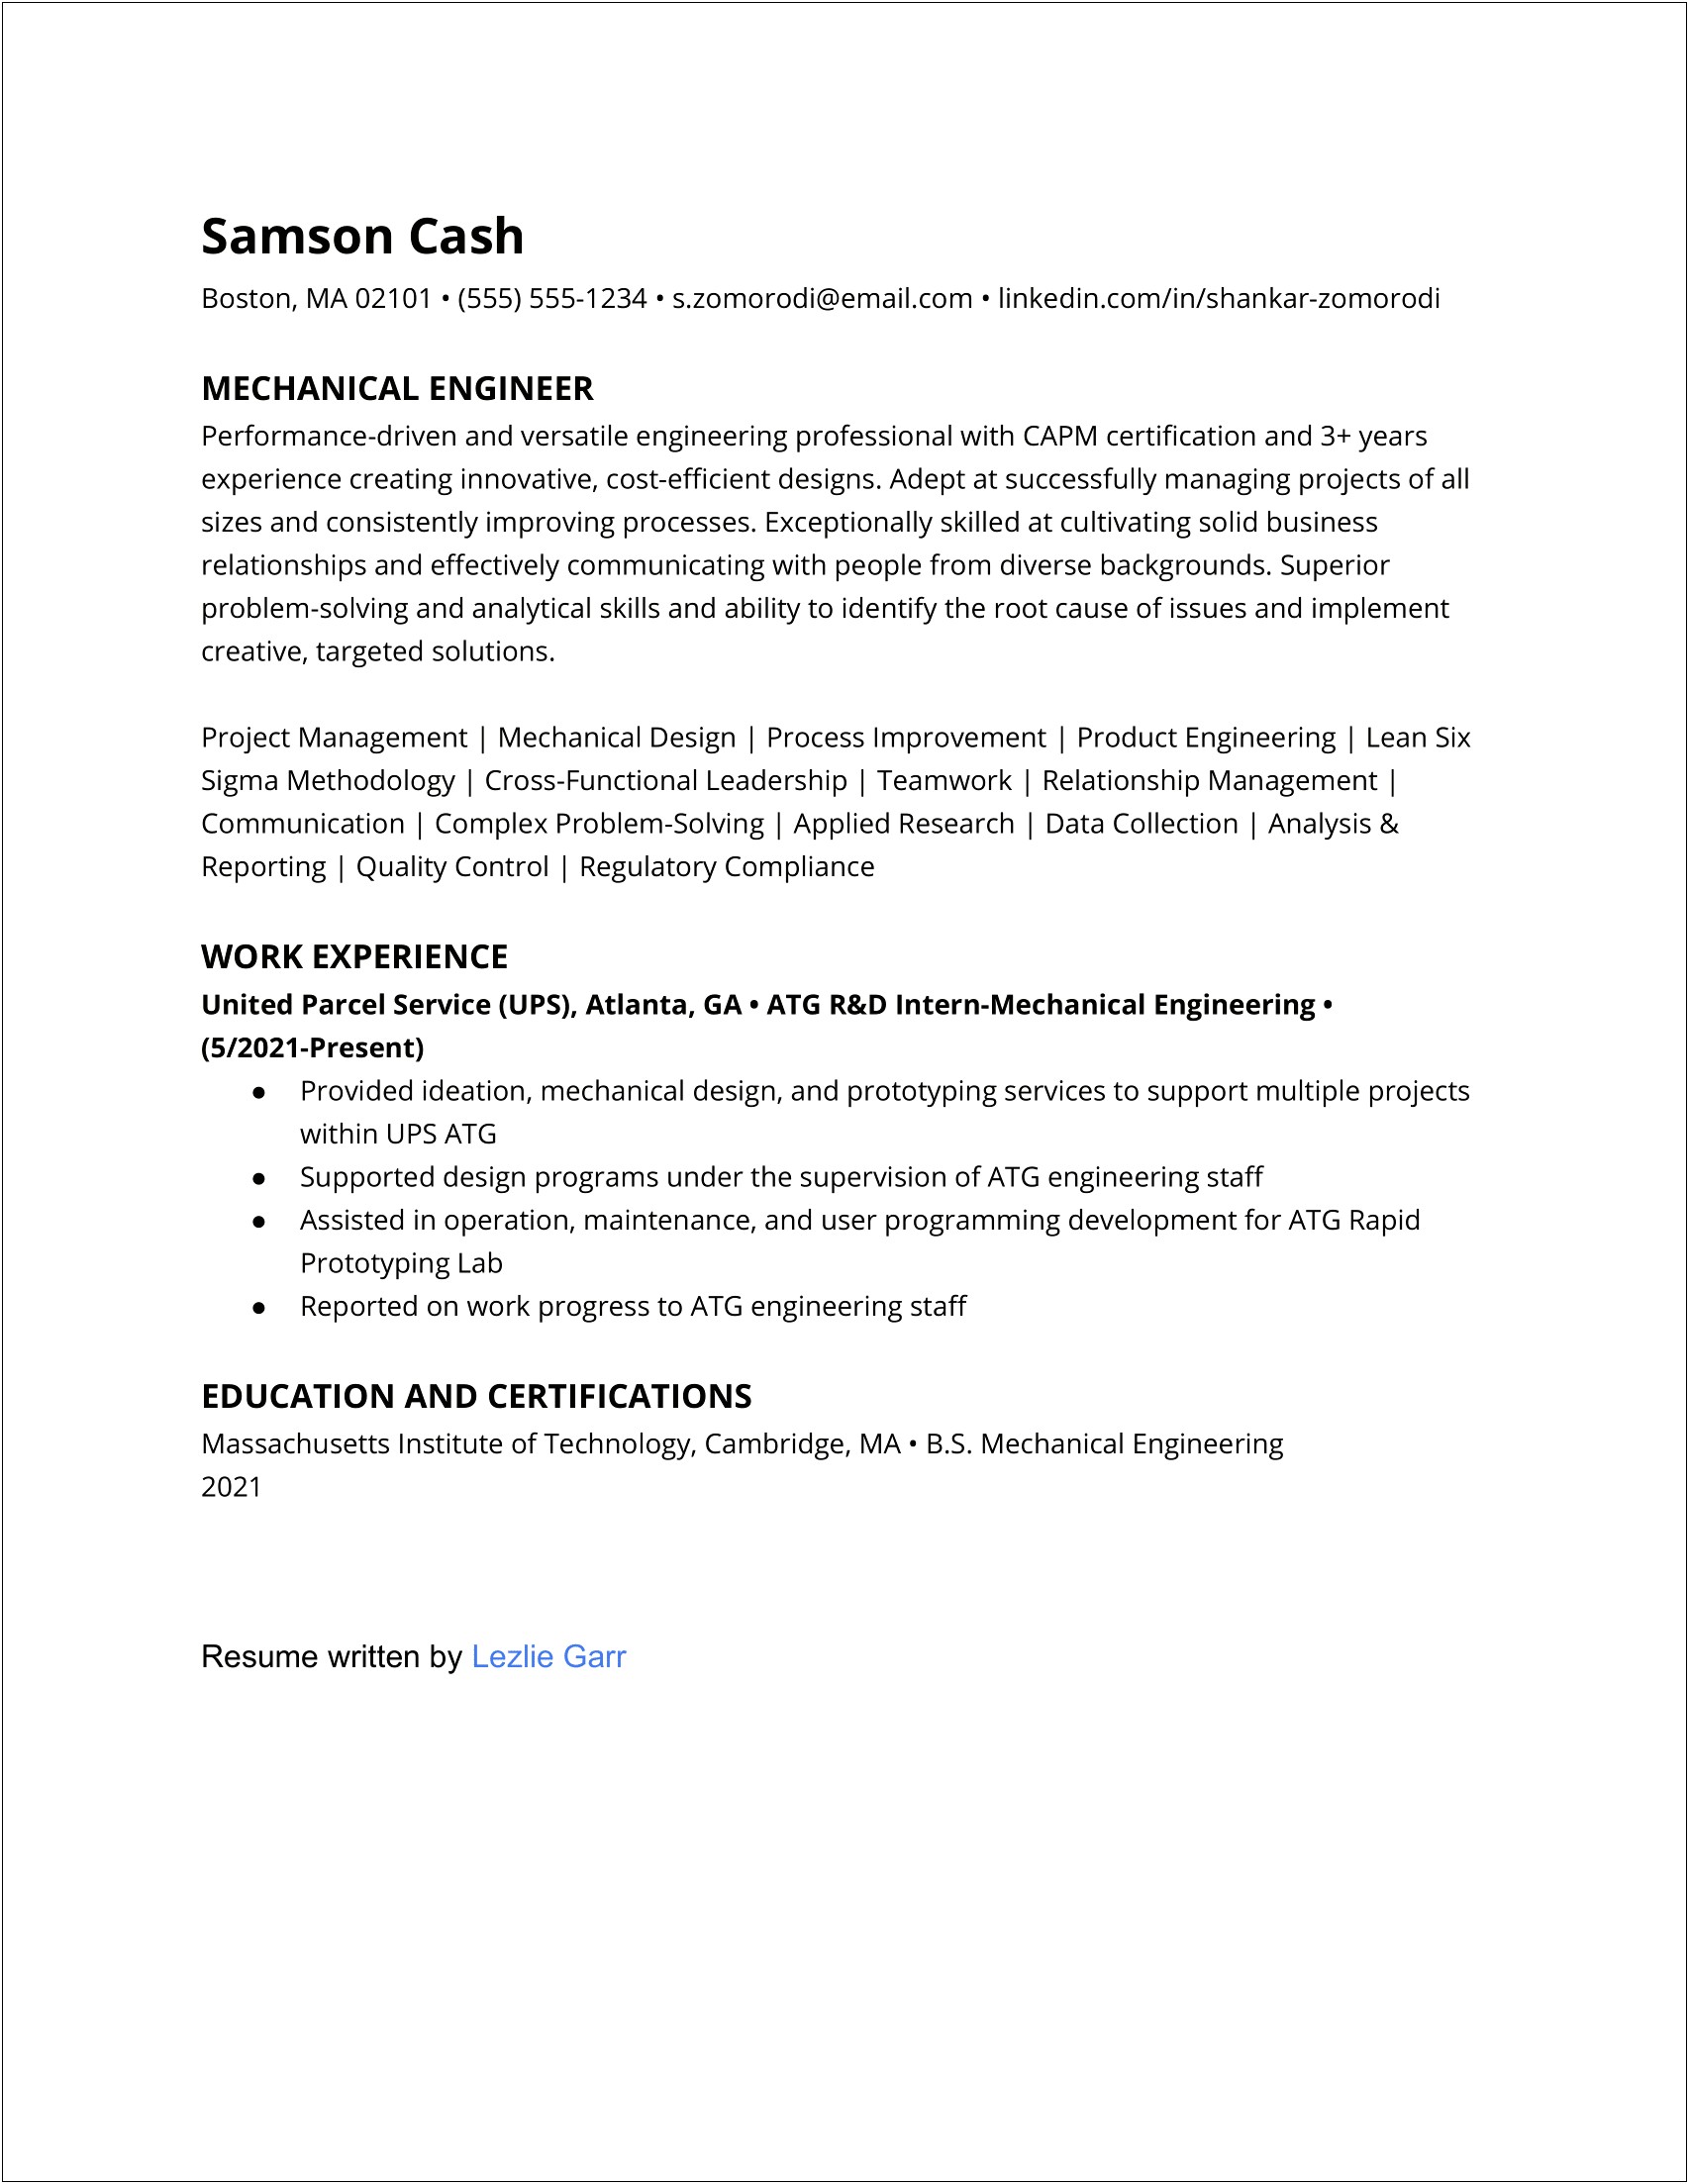 Electrical Engineer Entry Level Resume Example